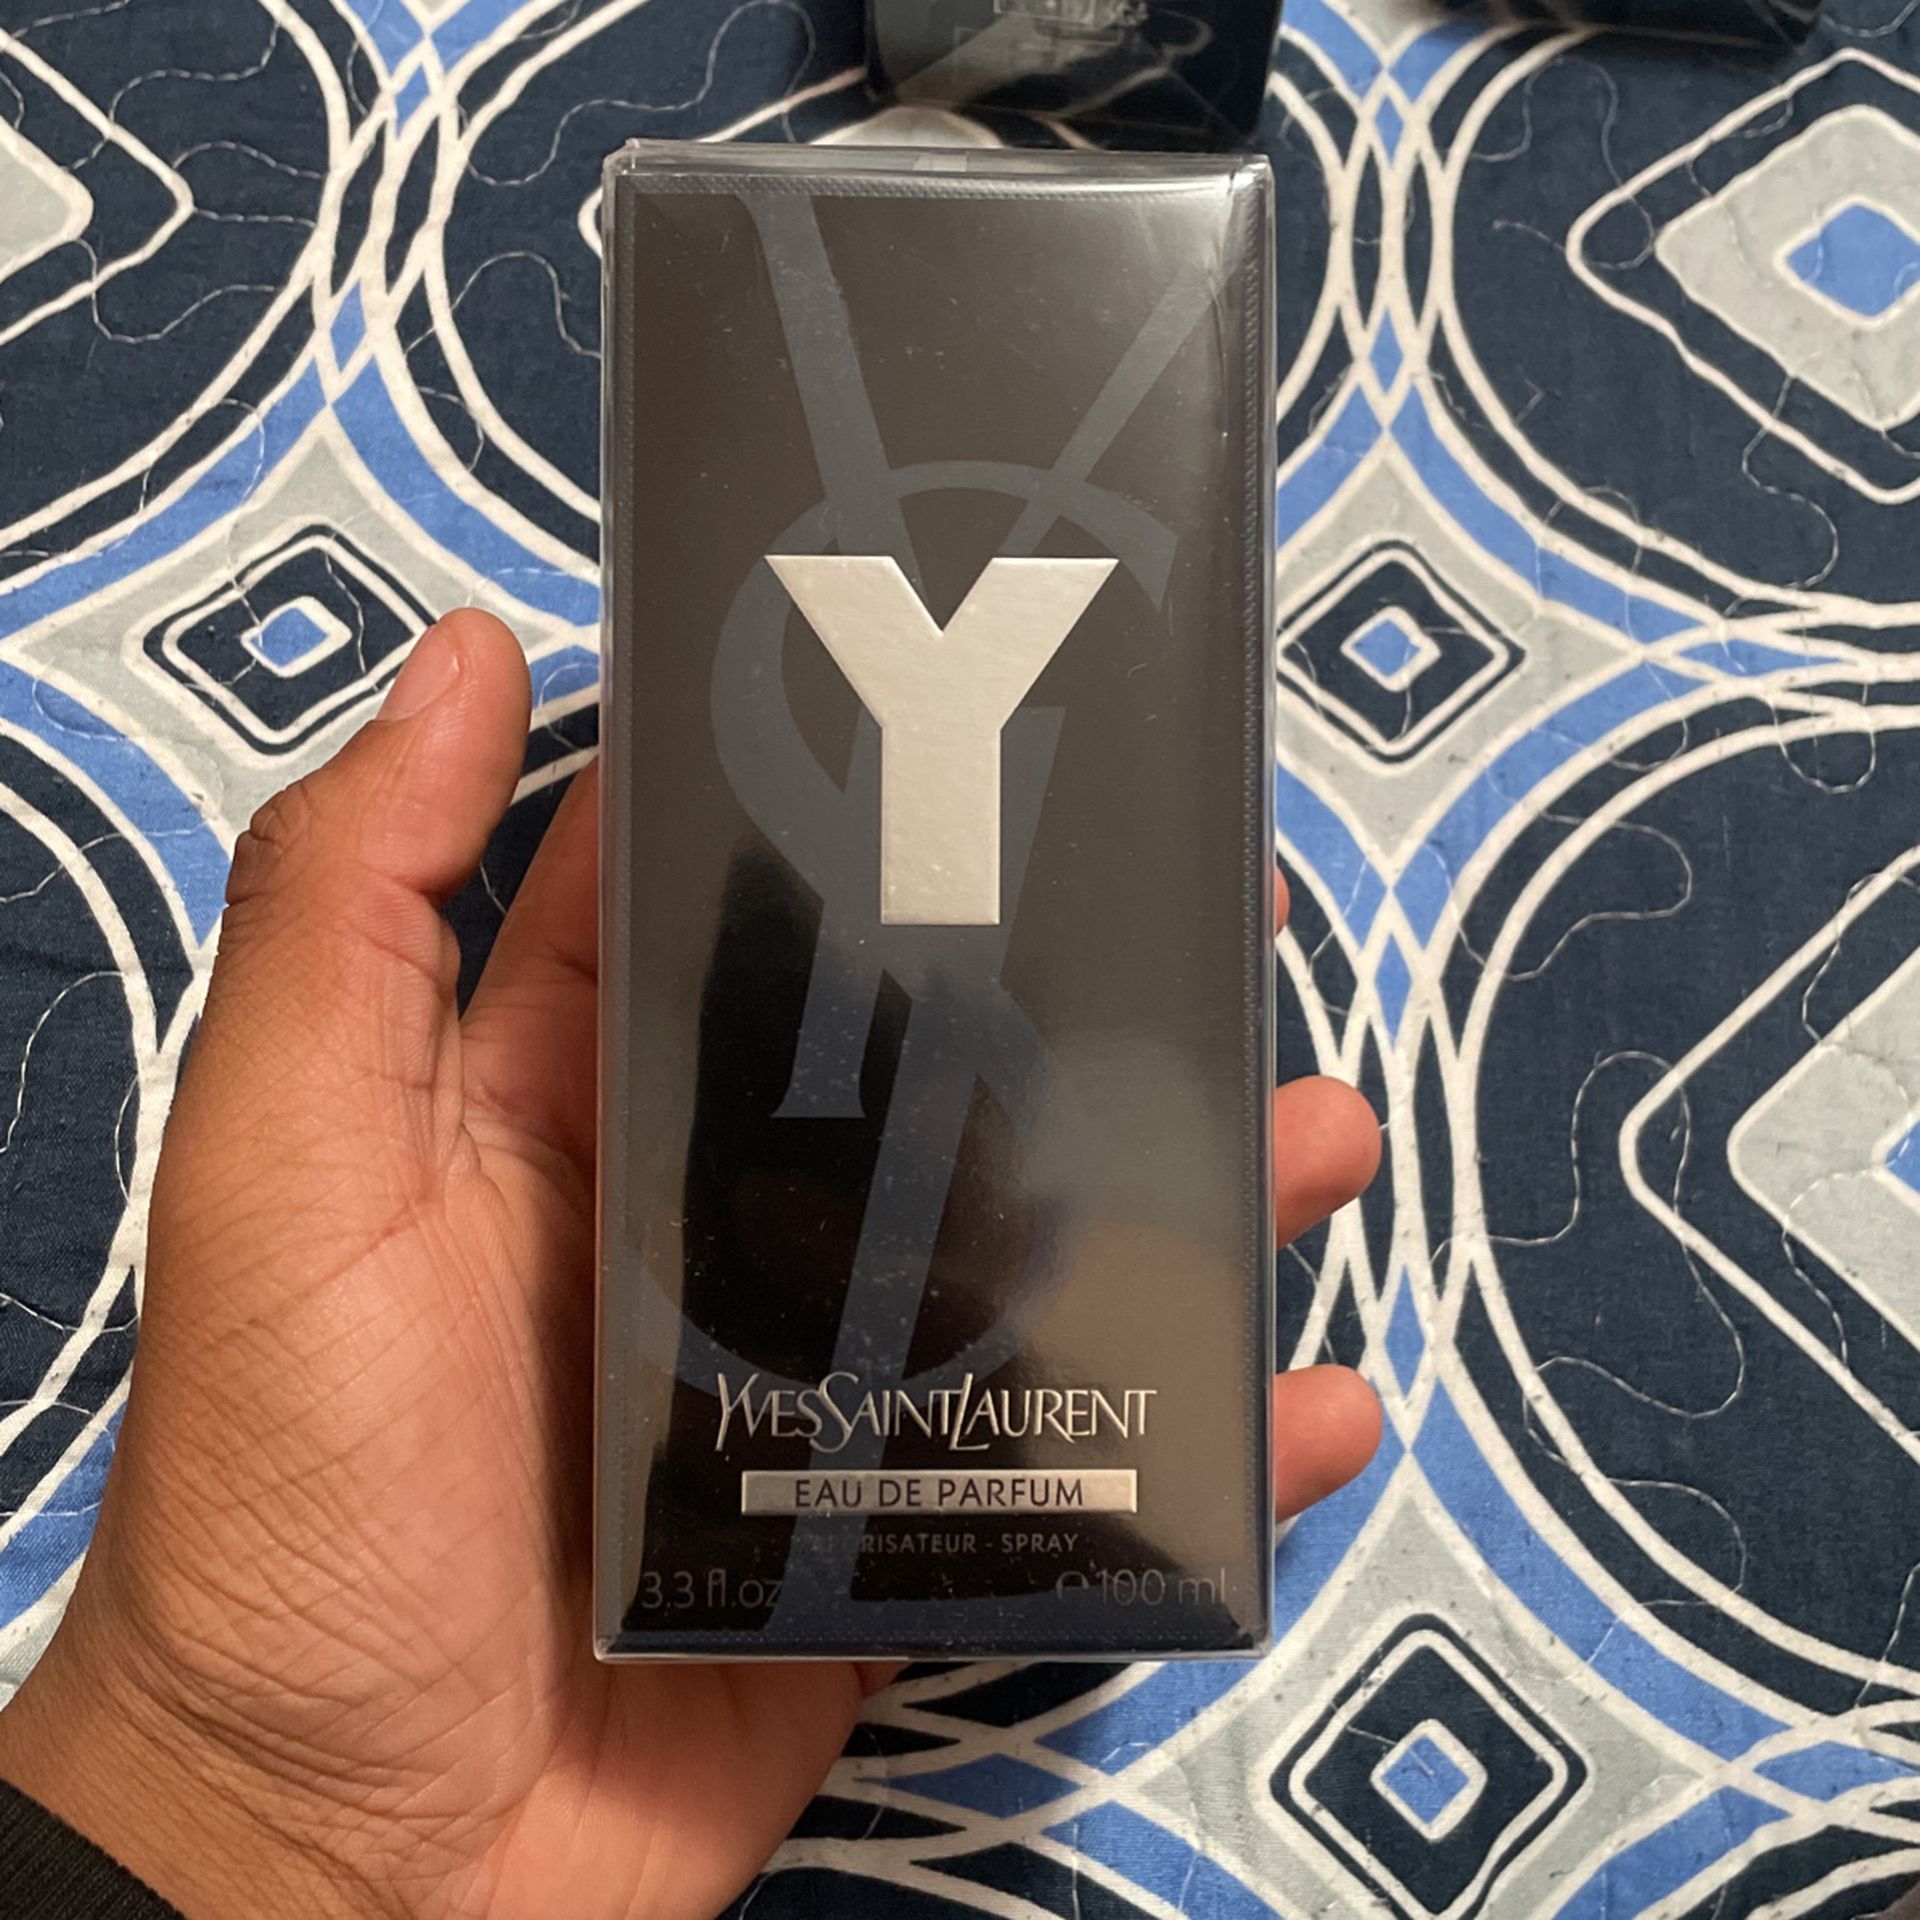 YSL New Cologne From Macys No Box 3.3 Oz 100 Ml for Sale in Queens, NY -  OfferUp